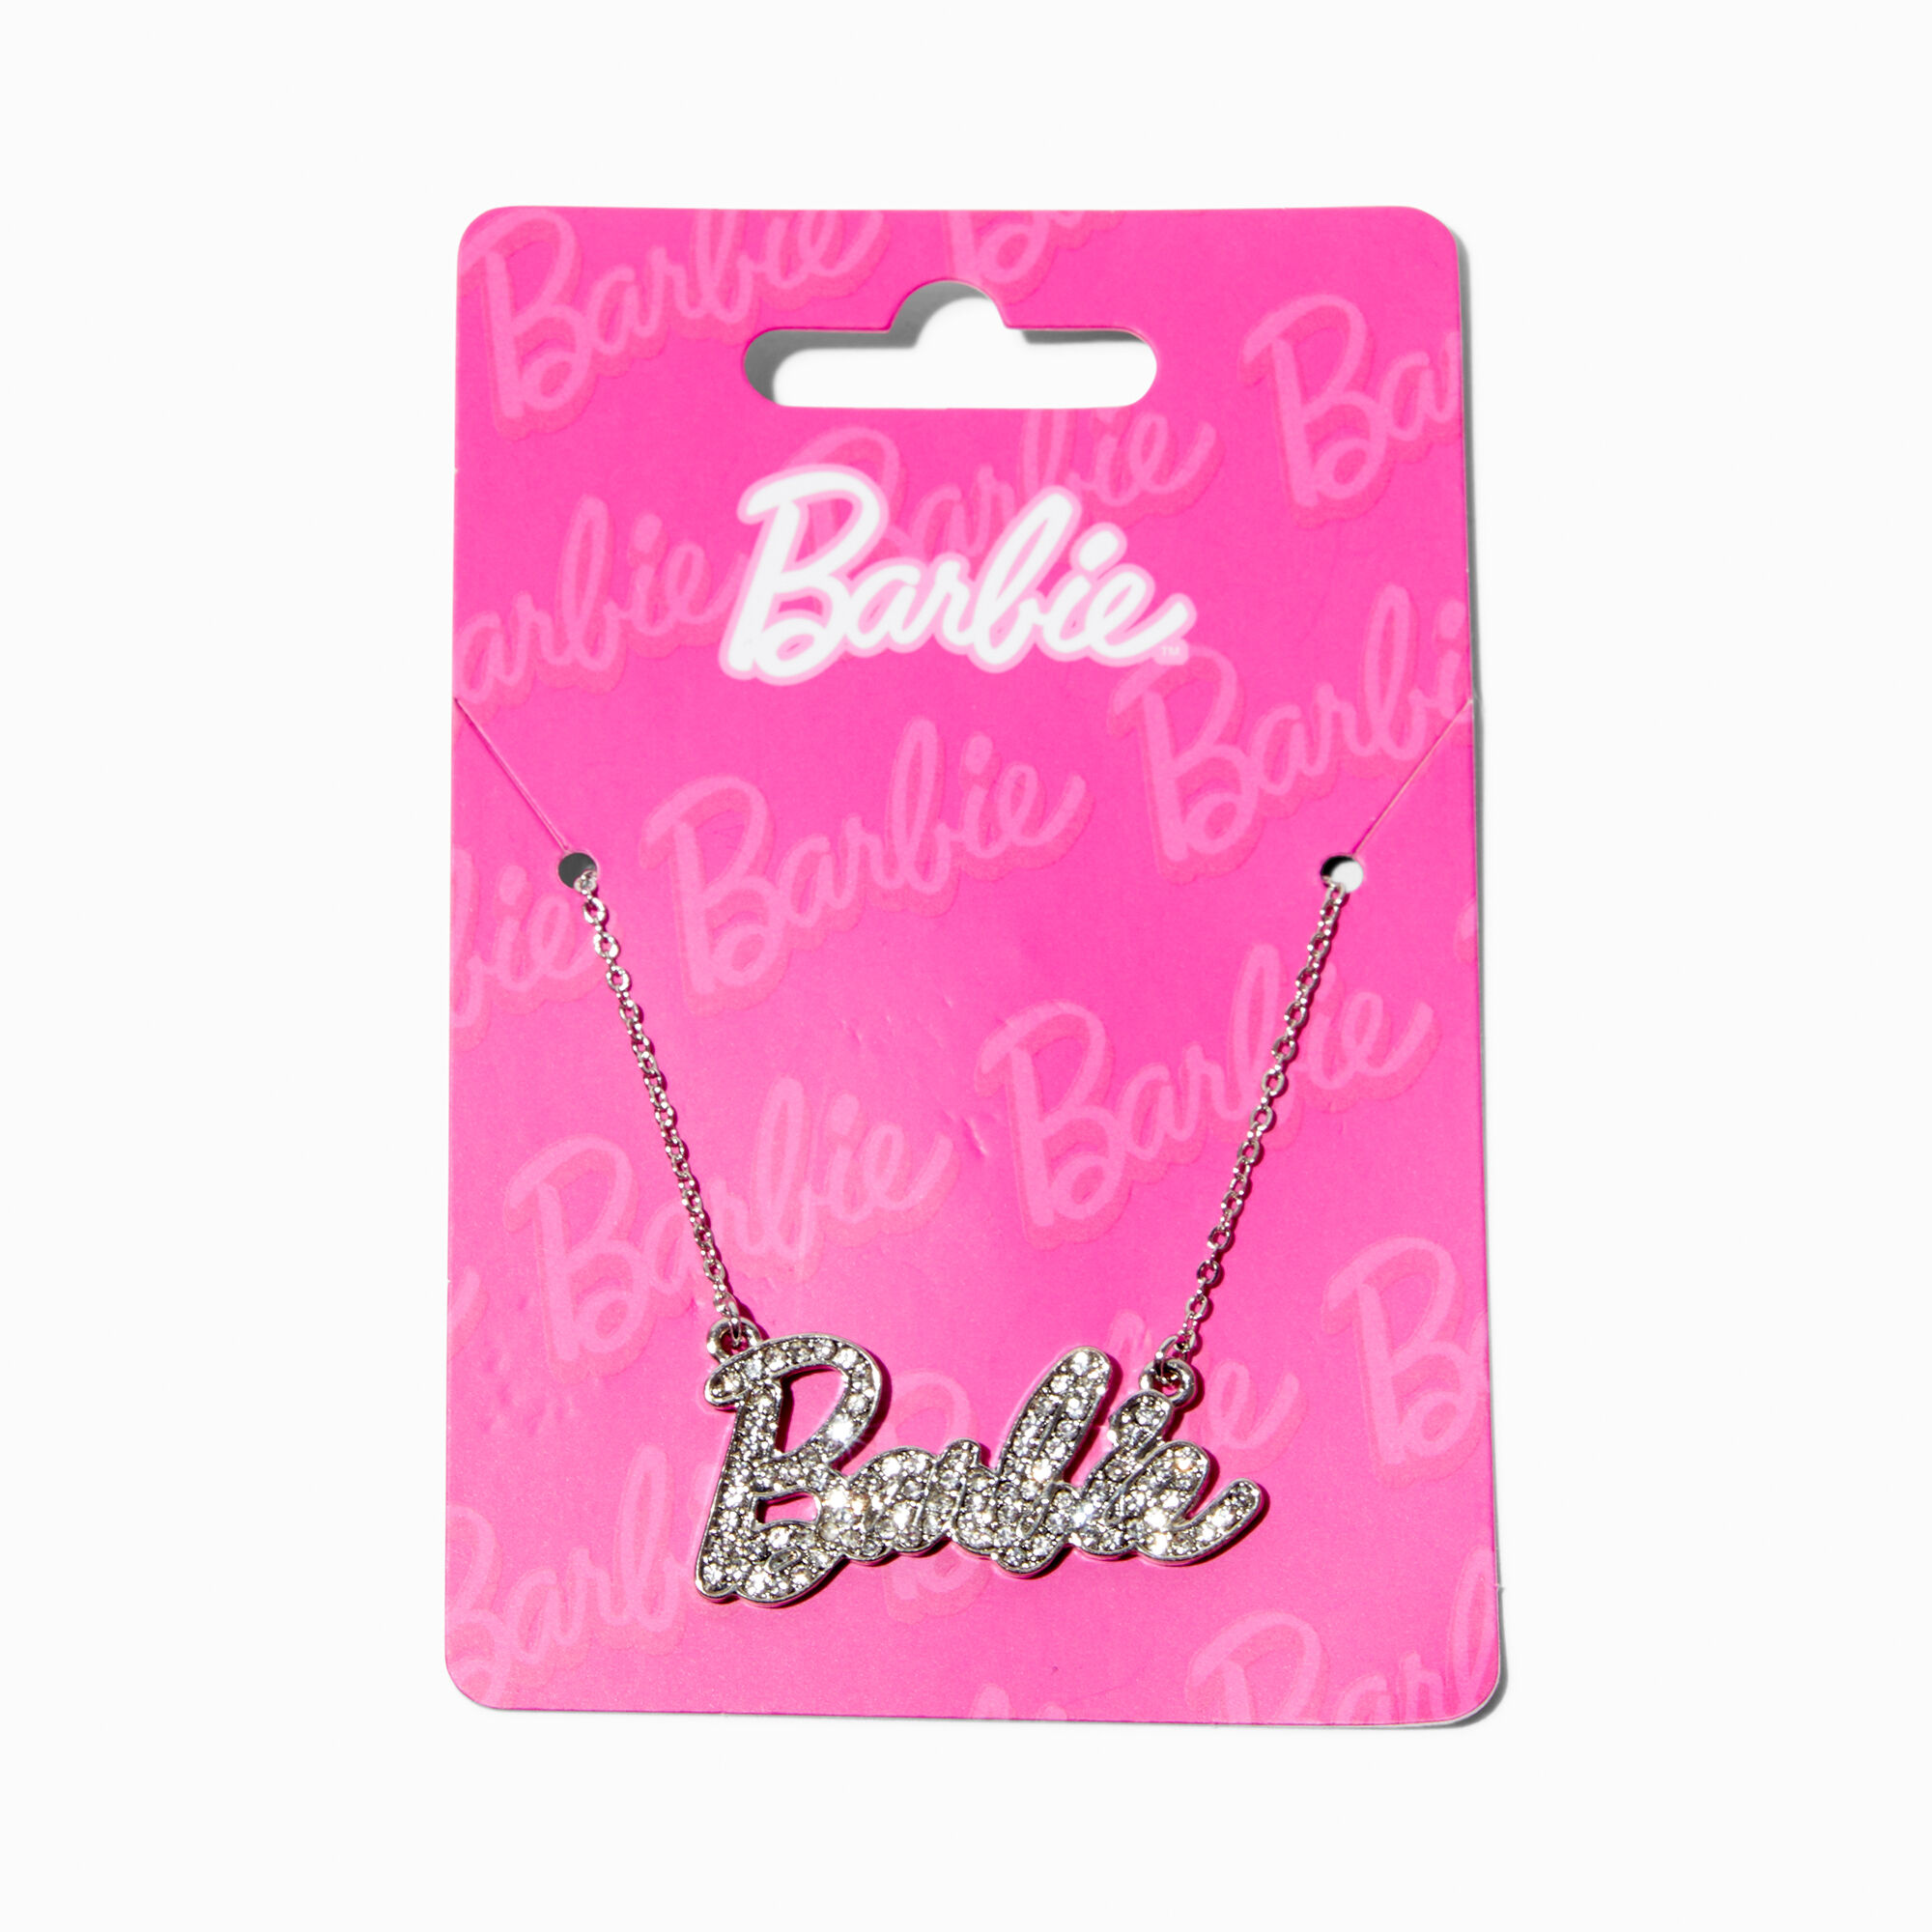 View Claires Barbie Logo Necklace Silver information